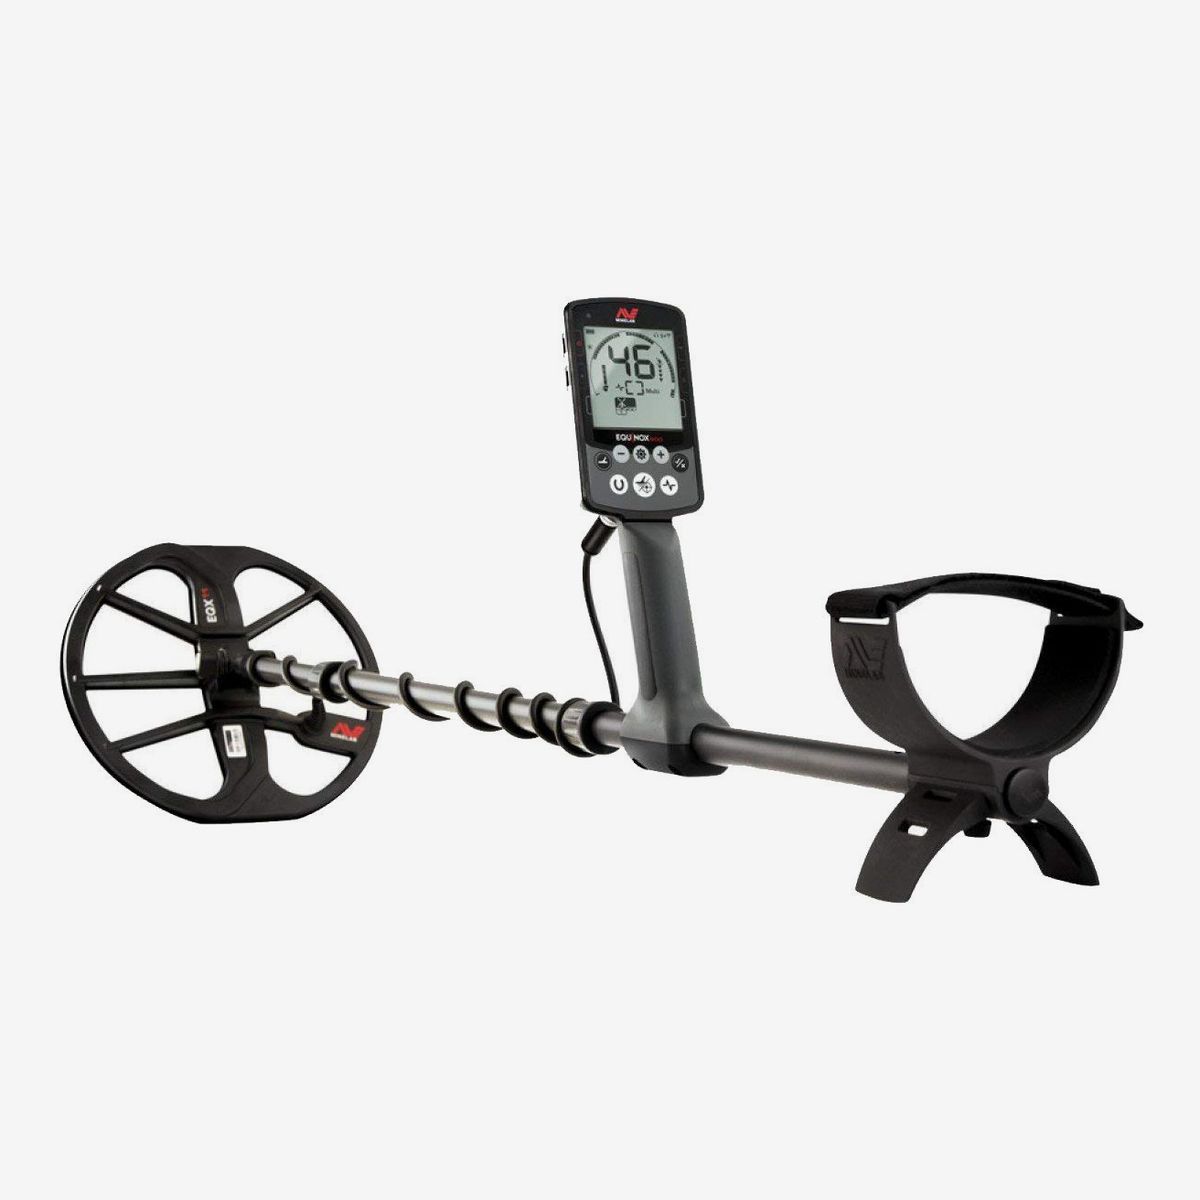 What are the top 5 best metal detectors?